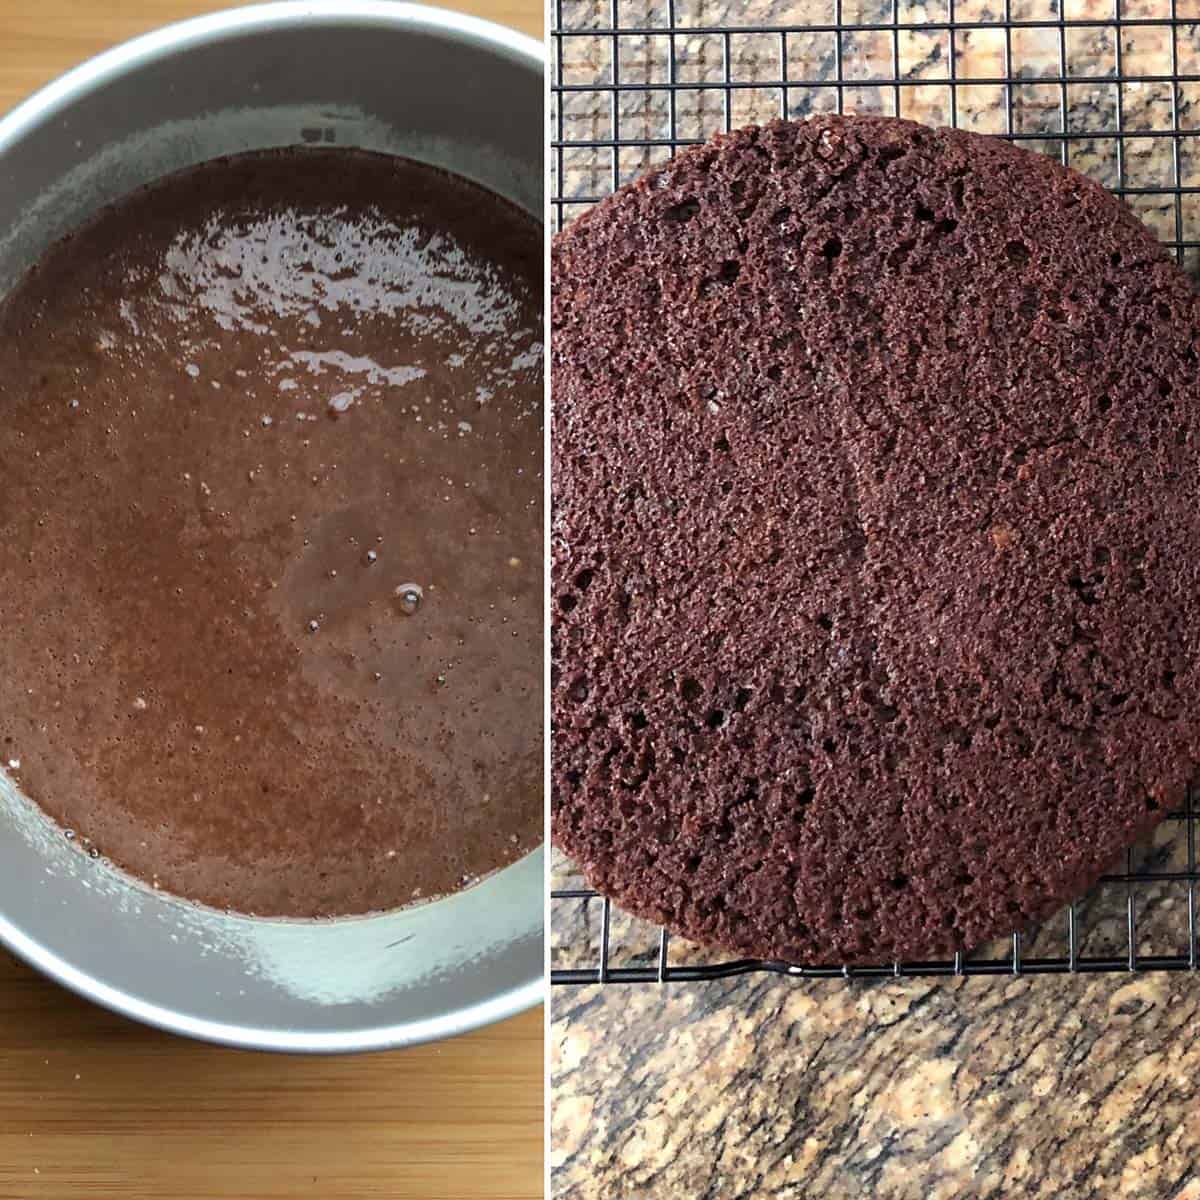 Side by side photos showing batter in cake pan and baked cake.